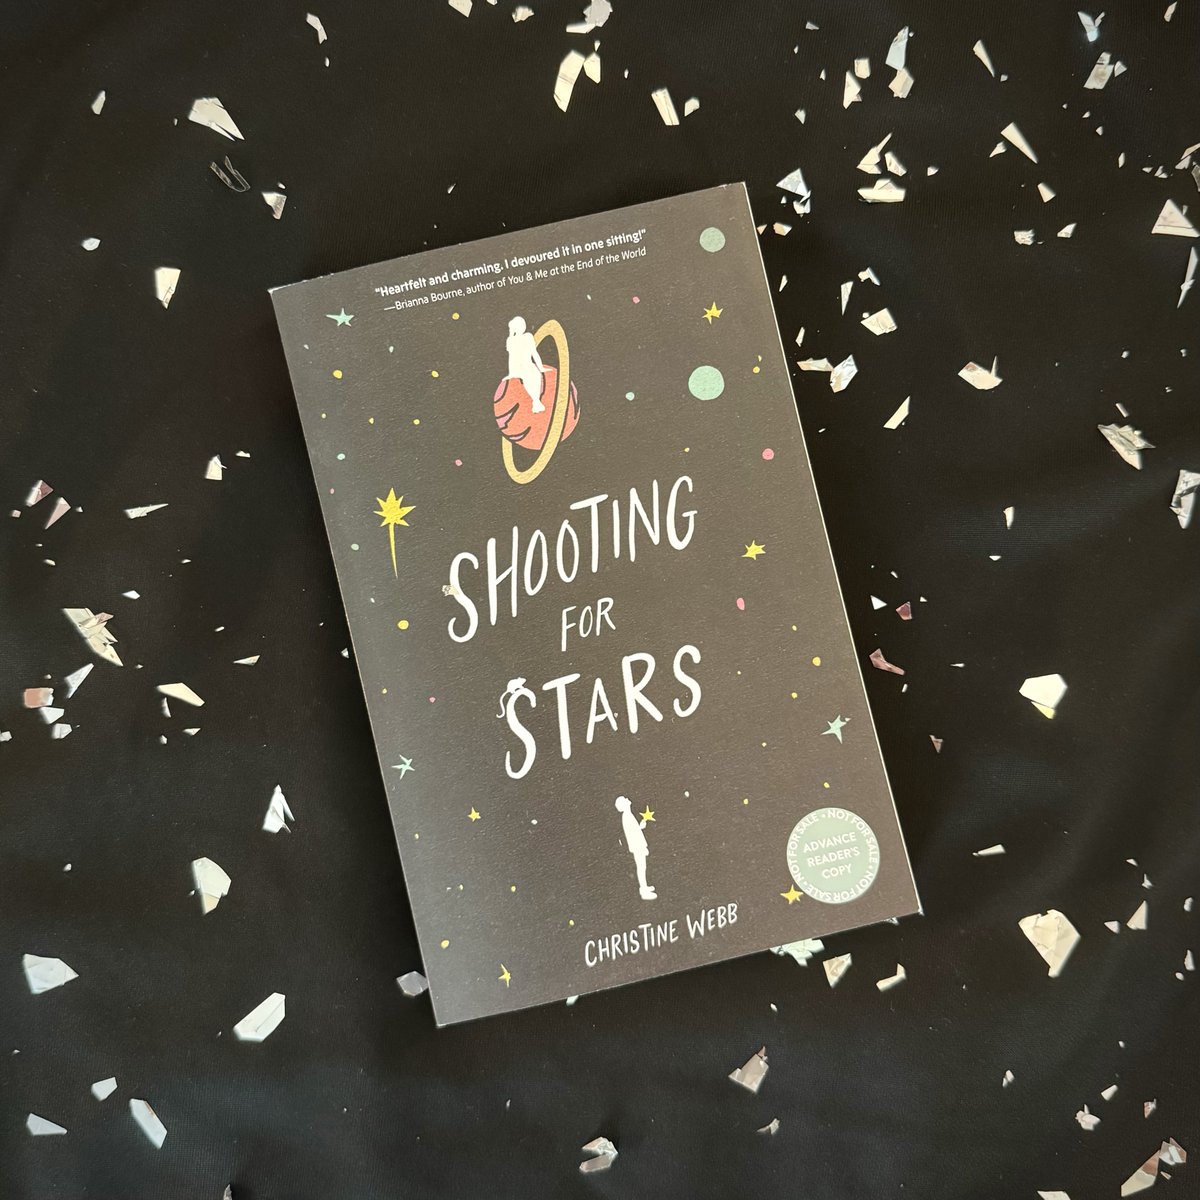 Happy book birthday to SHOOTING FOR STARS! This #yalit contemporary about reaching for your dreams is on shelves today! @cwebbwrites ow.ly/iVHr50ROQcH #bookbirthday